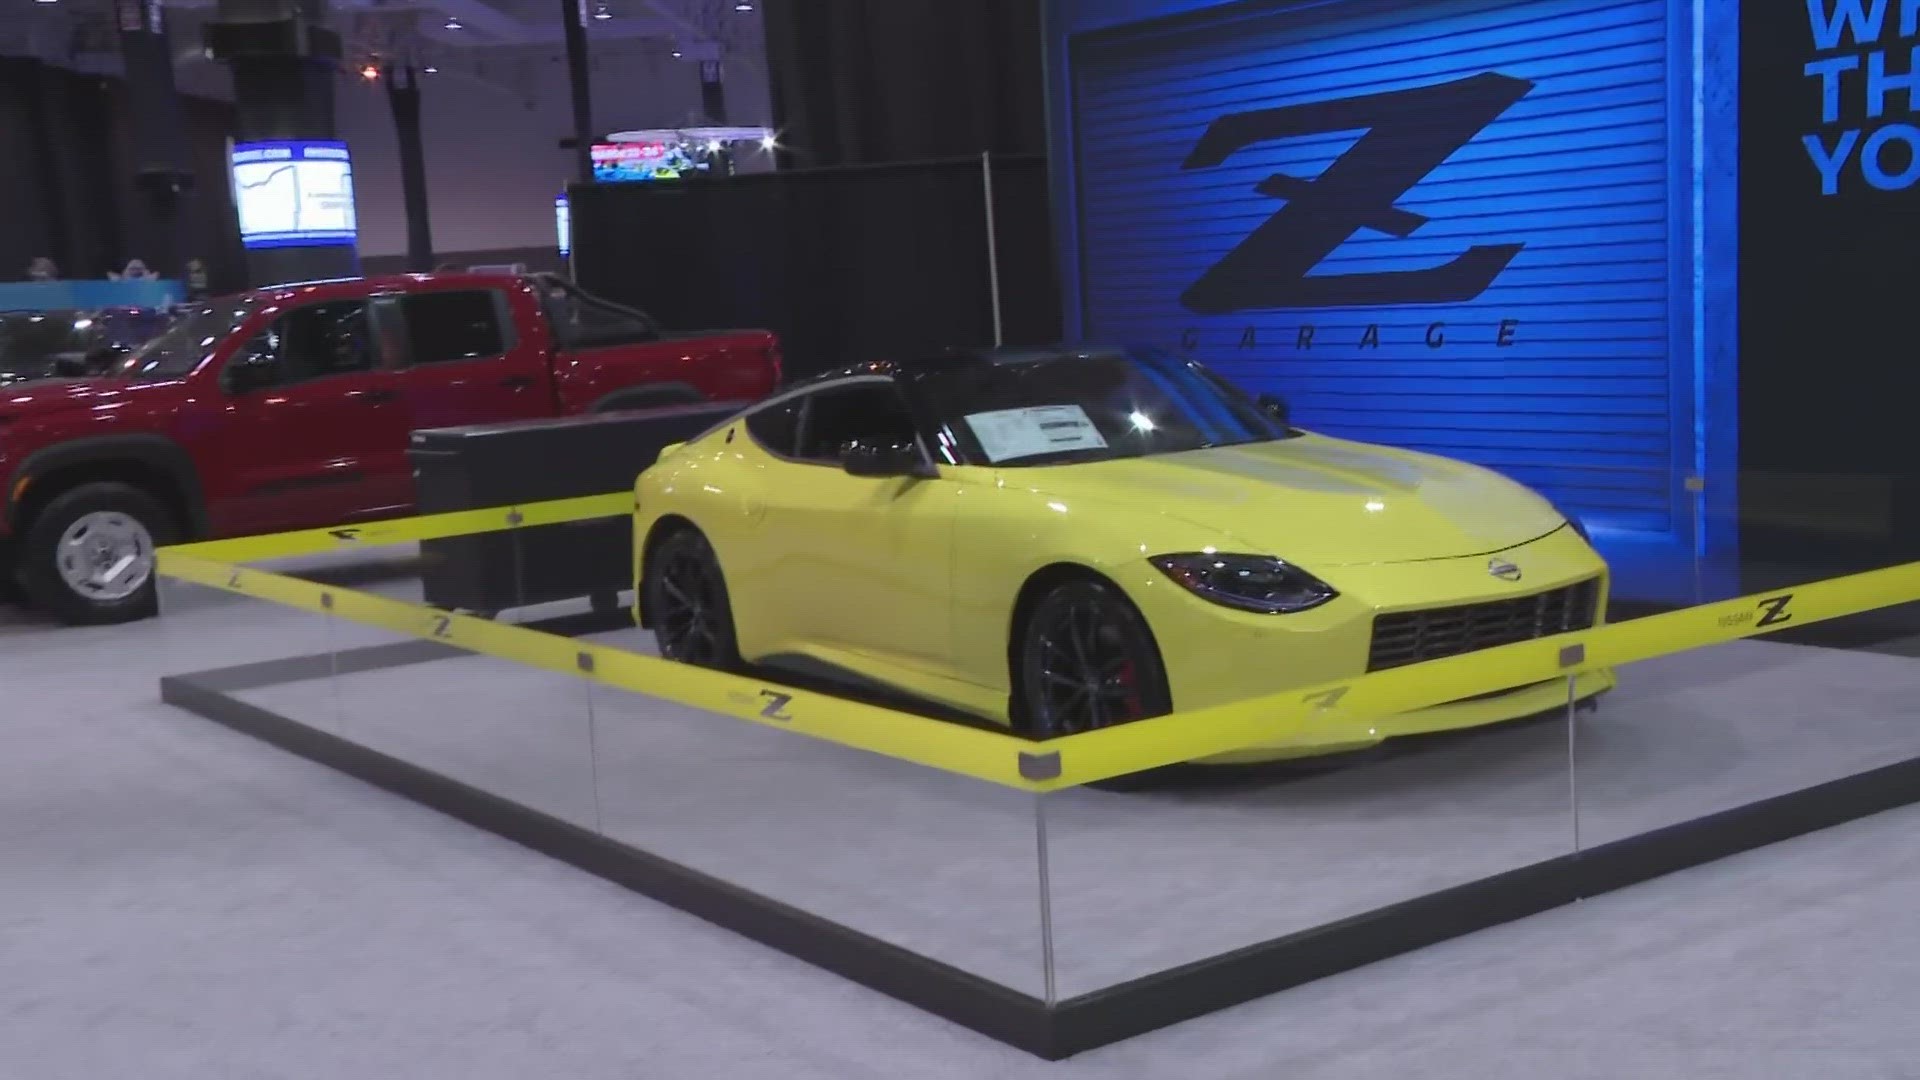 3News' Kierra Cotton has everything you need to know from the Cleveland Auto Show.